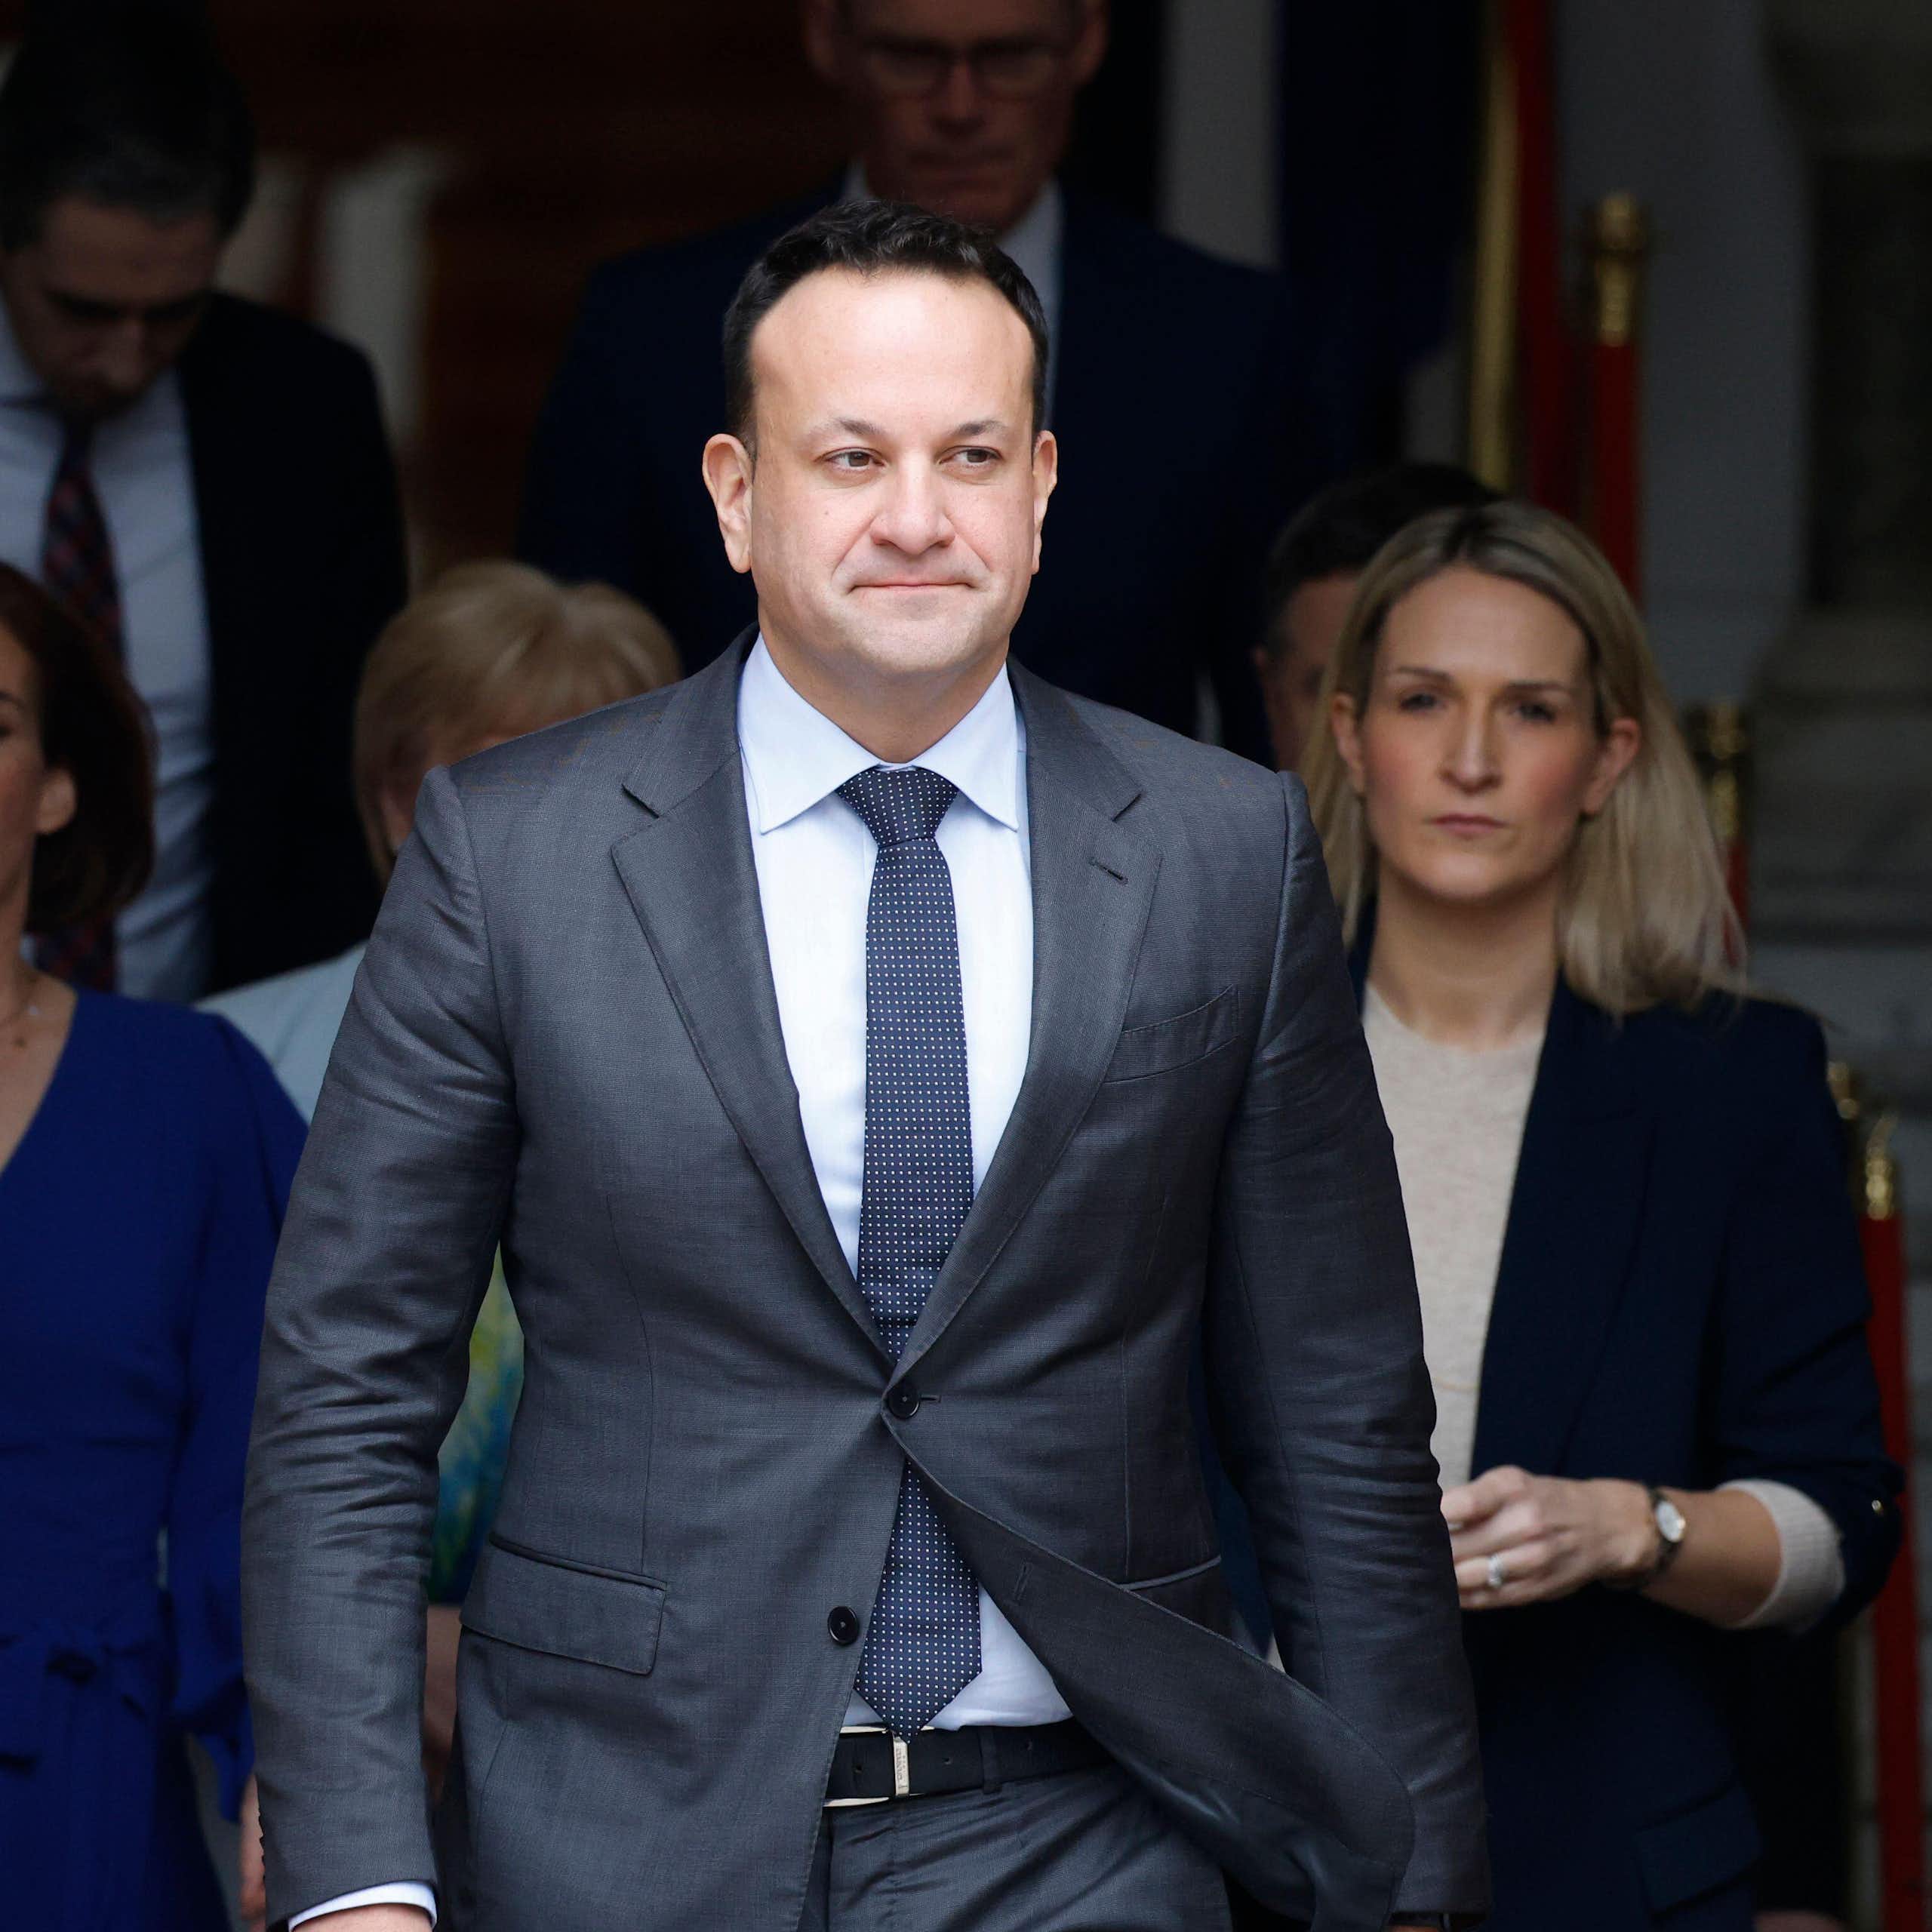 Leo Varadkar walking out of a building with a team of people behind him